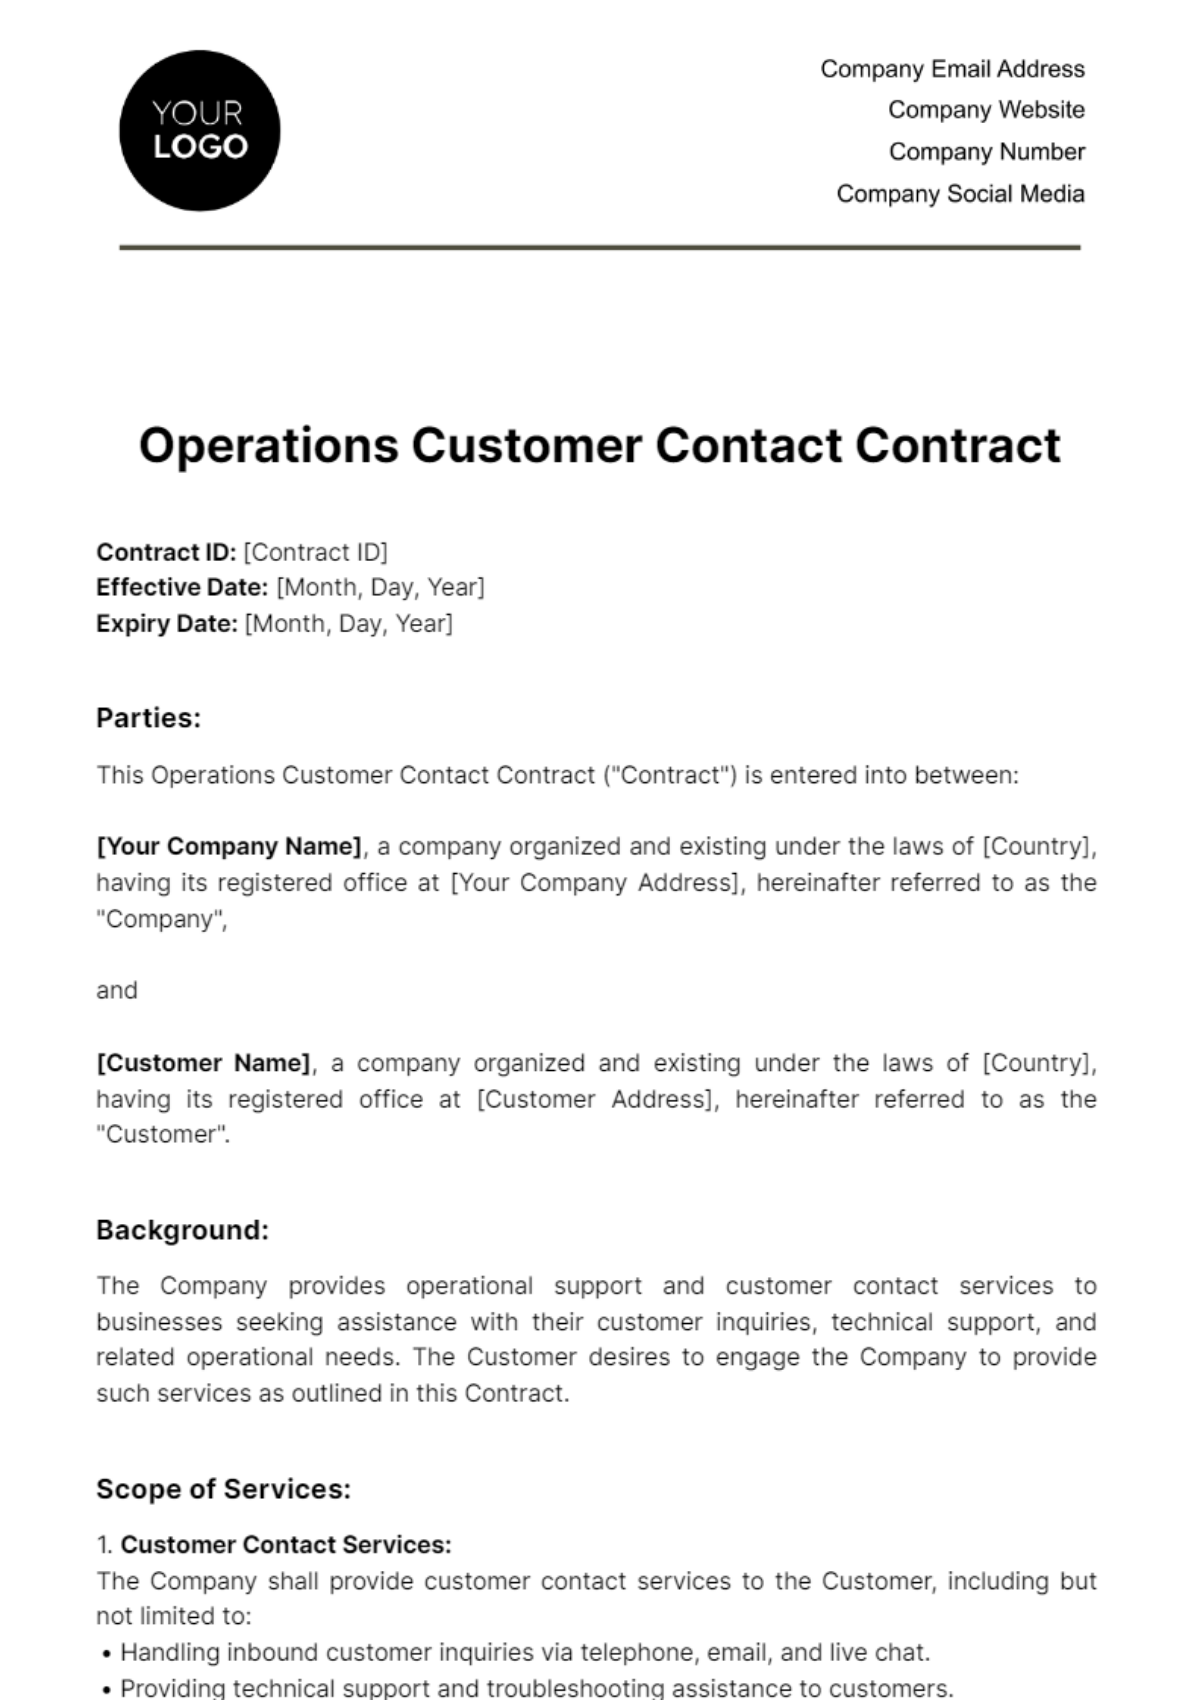 Free Operations Customer Contact Contract Template